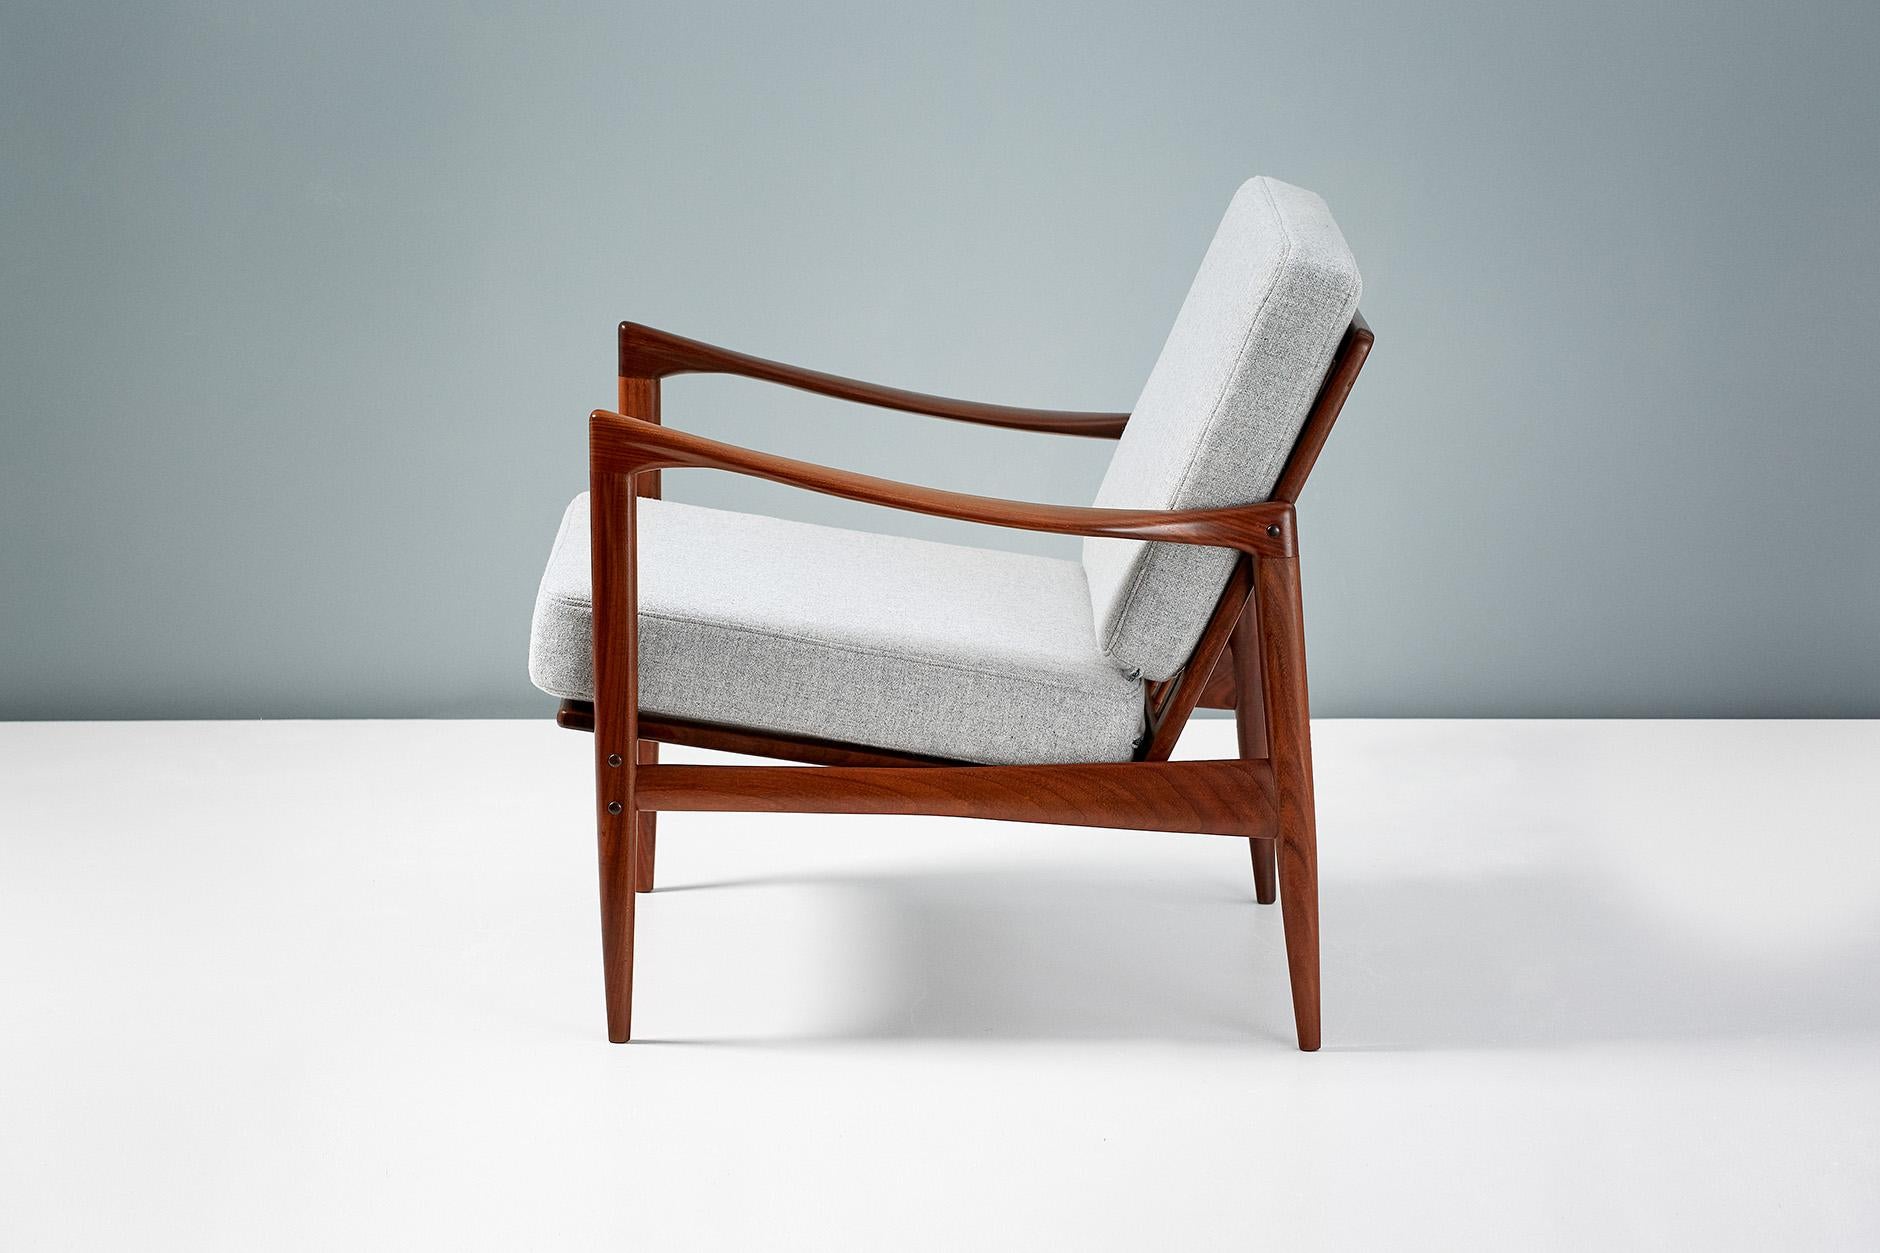 A pair of Afromosia African teak 'Kandidaten', (Candidate), lounge chairs produced by Olof Perssons Fatoljindustri (O.P.E.) in Jonkoping, Sweden, circa 1960. 

Danish master Ib Kofod-Larsen gained popularity in his native Denmark in the 1950s via